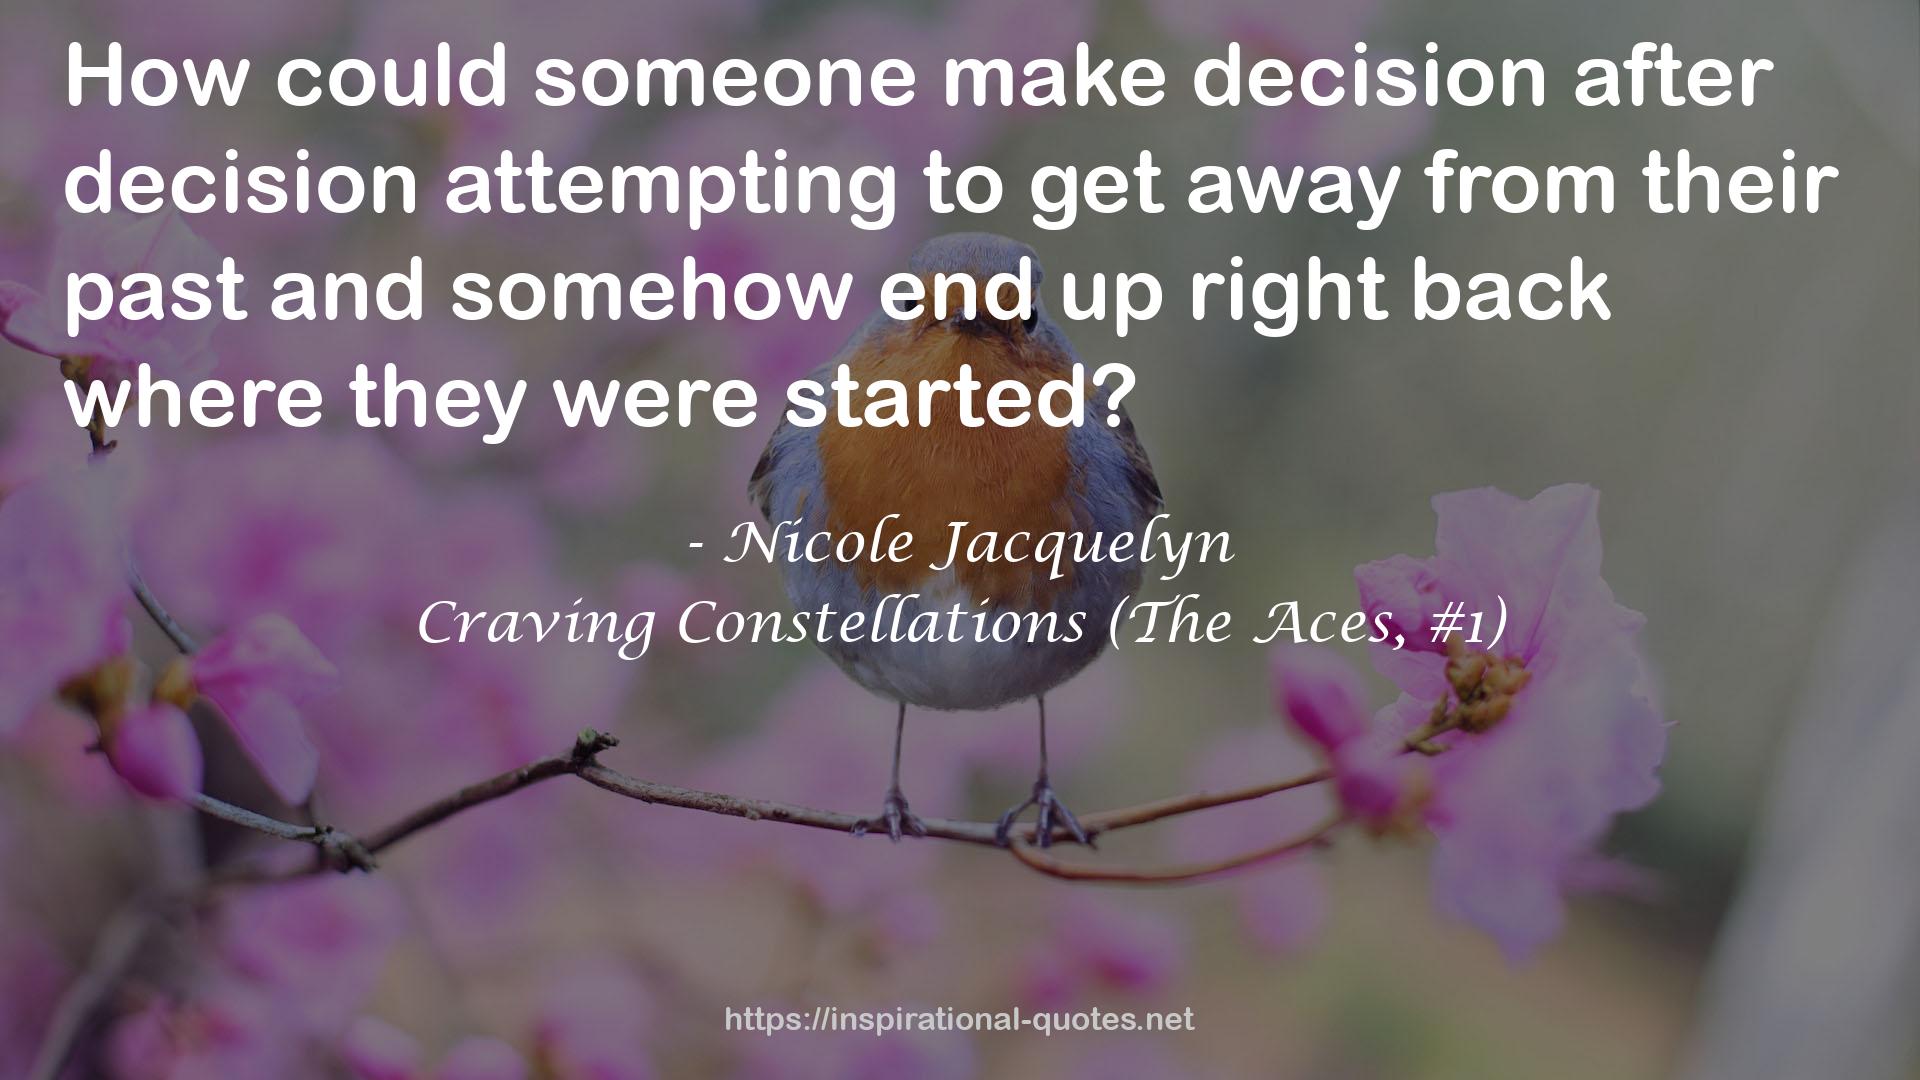 Craving Constellations (The Aces, #1) QUOTES